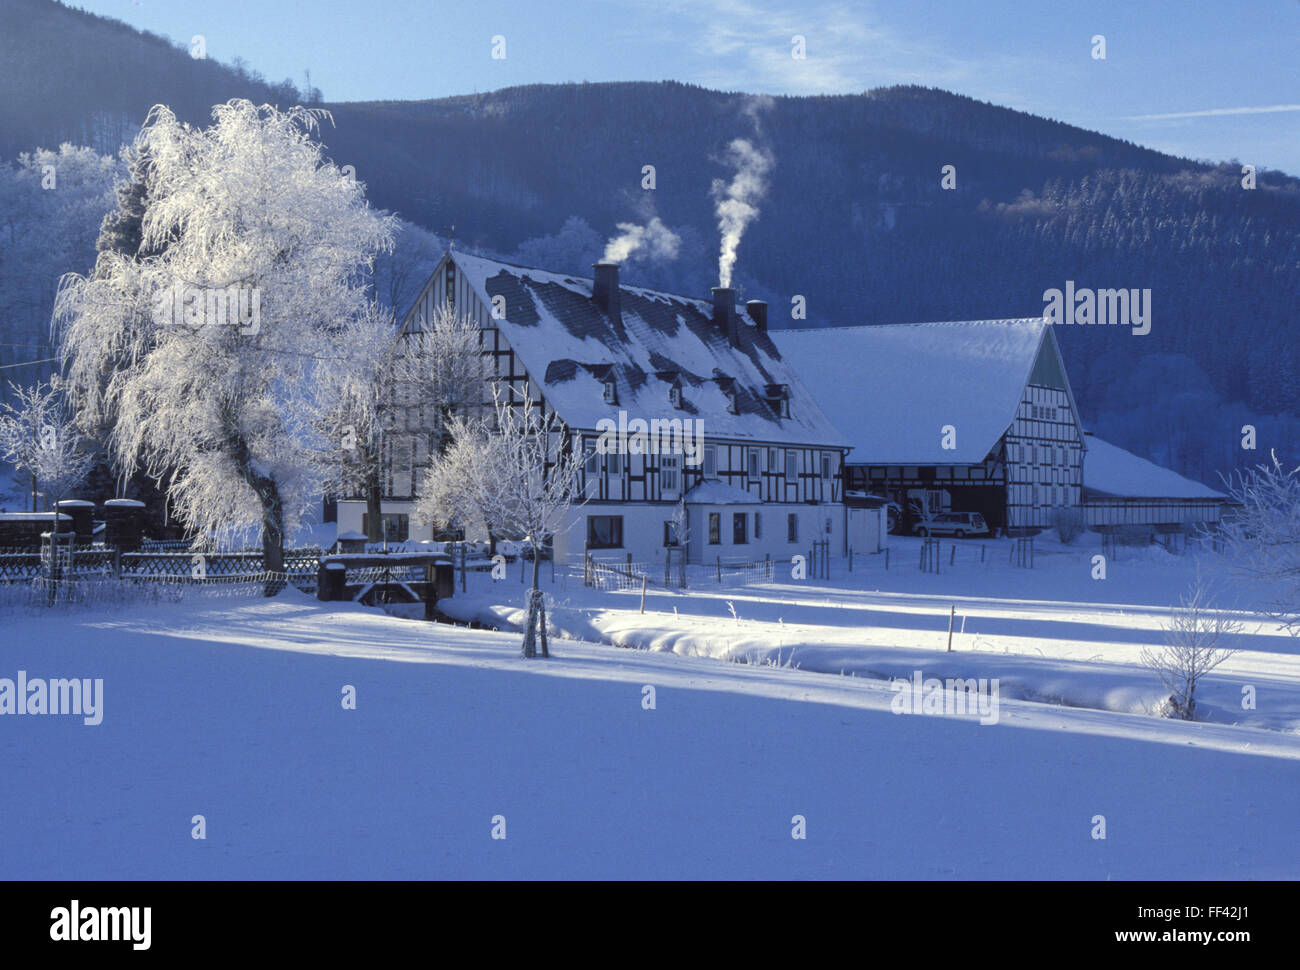 Kamin Rauch High Resolution Stock Photography and Images - Alamy